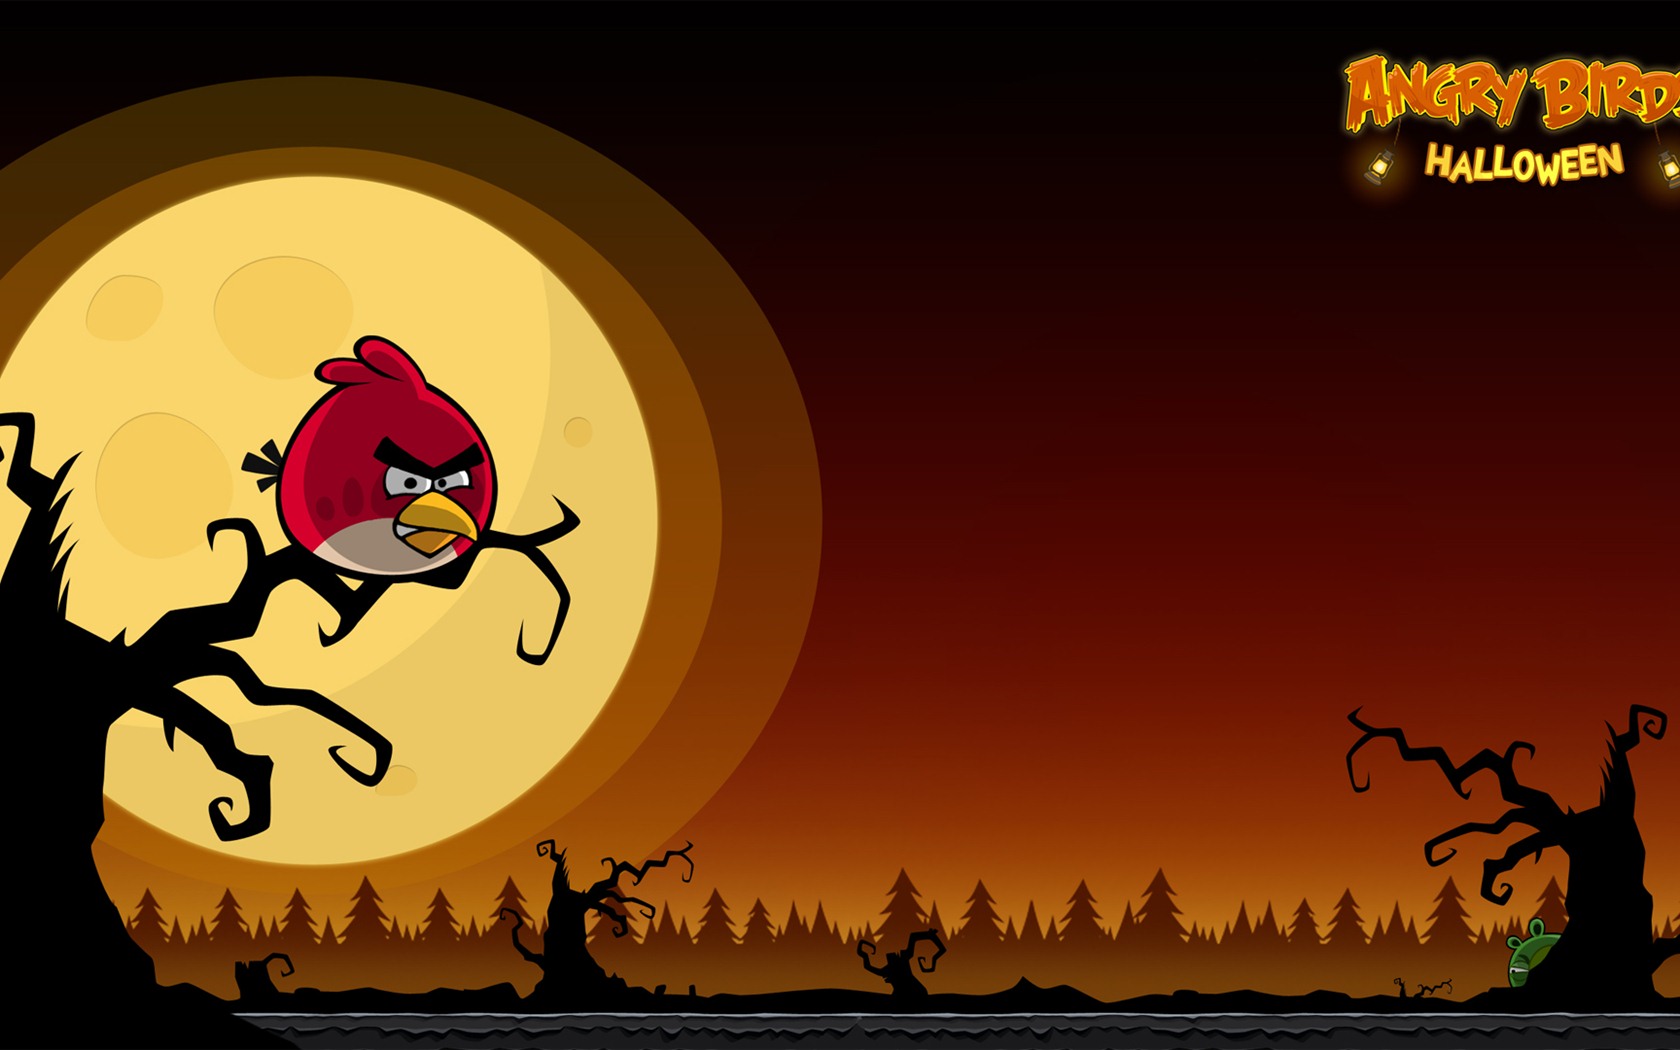 Angry Birds Spiel wallpapers #26 - 1680x1050